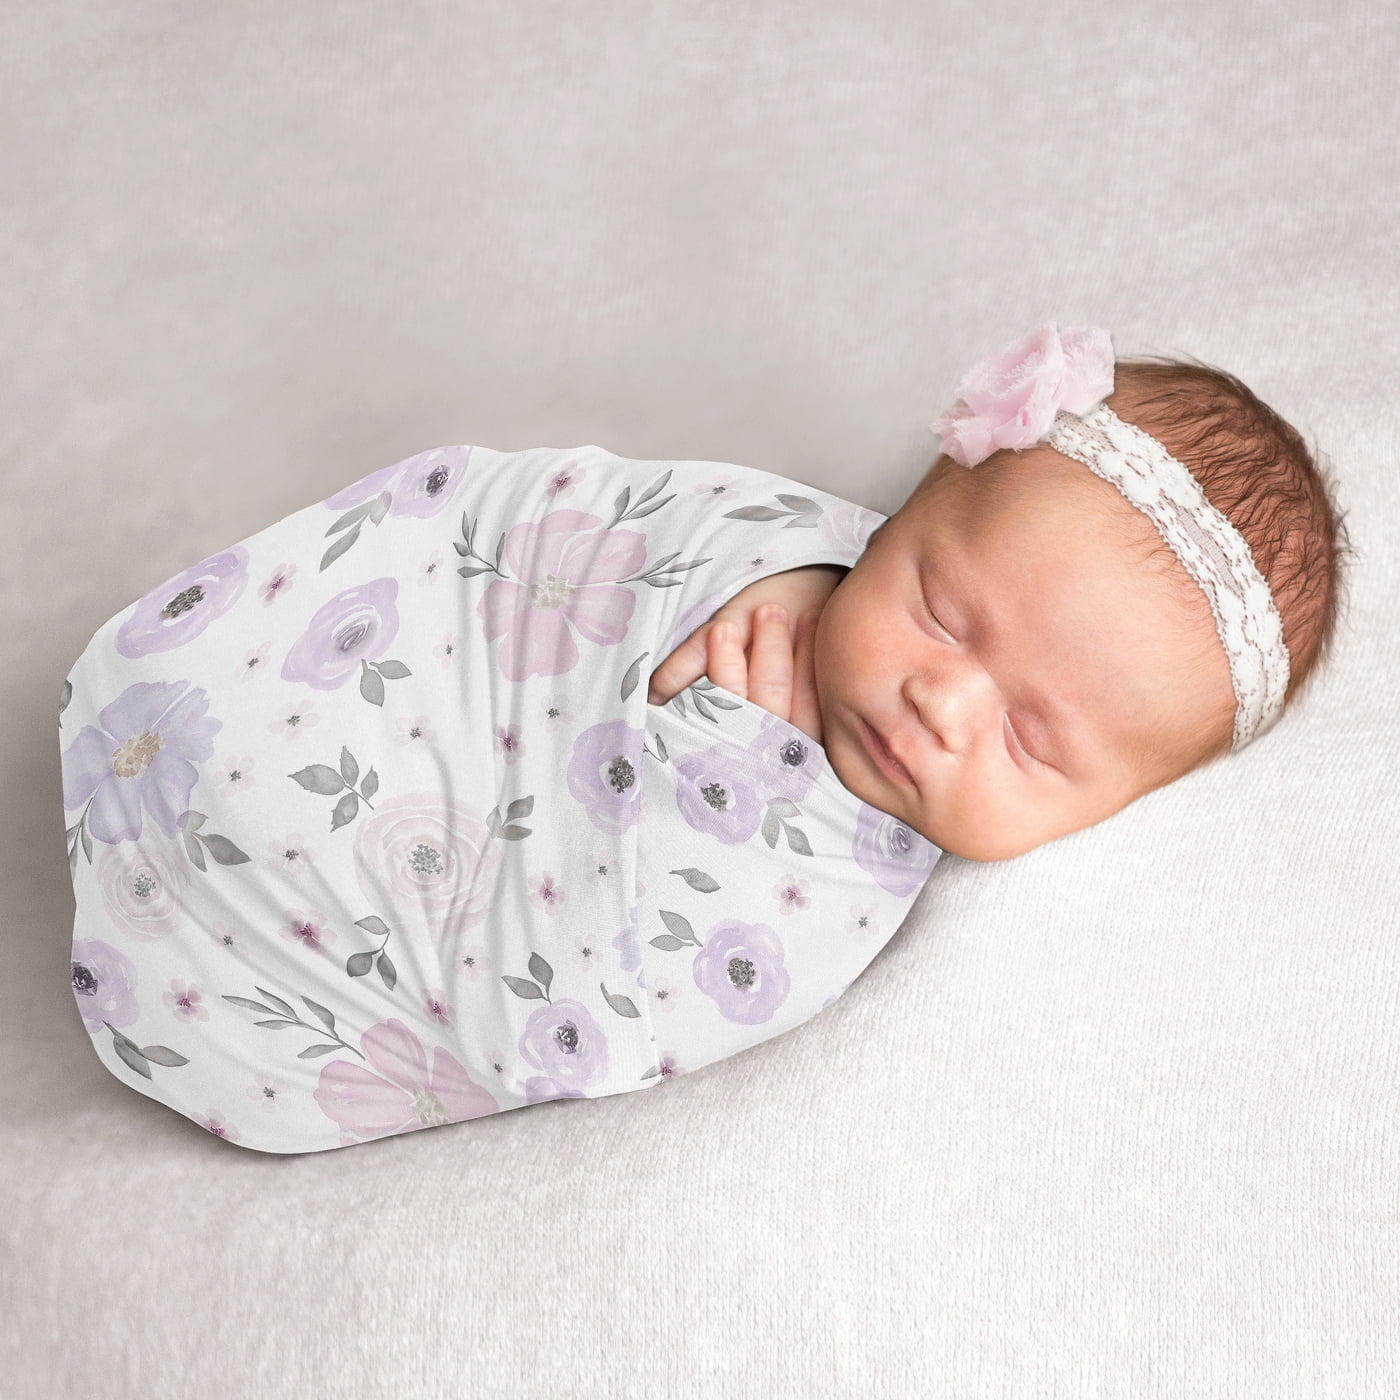 BOHO BABY NURSERY Baby Swaddles Baby Nursery must have Gorgeous gray and pink floral steer Newborn photography gift  Soft jersey fabric